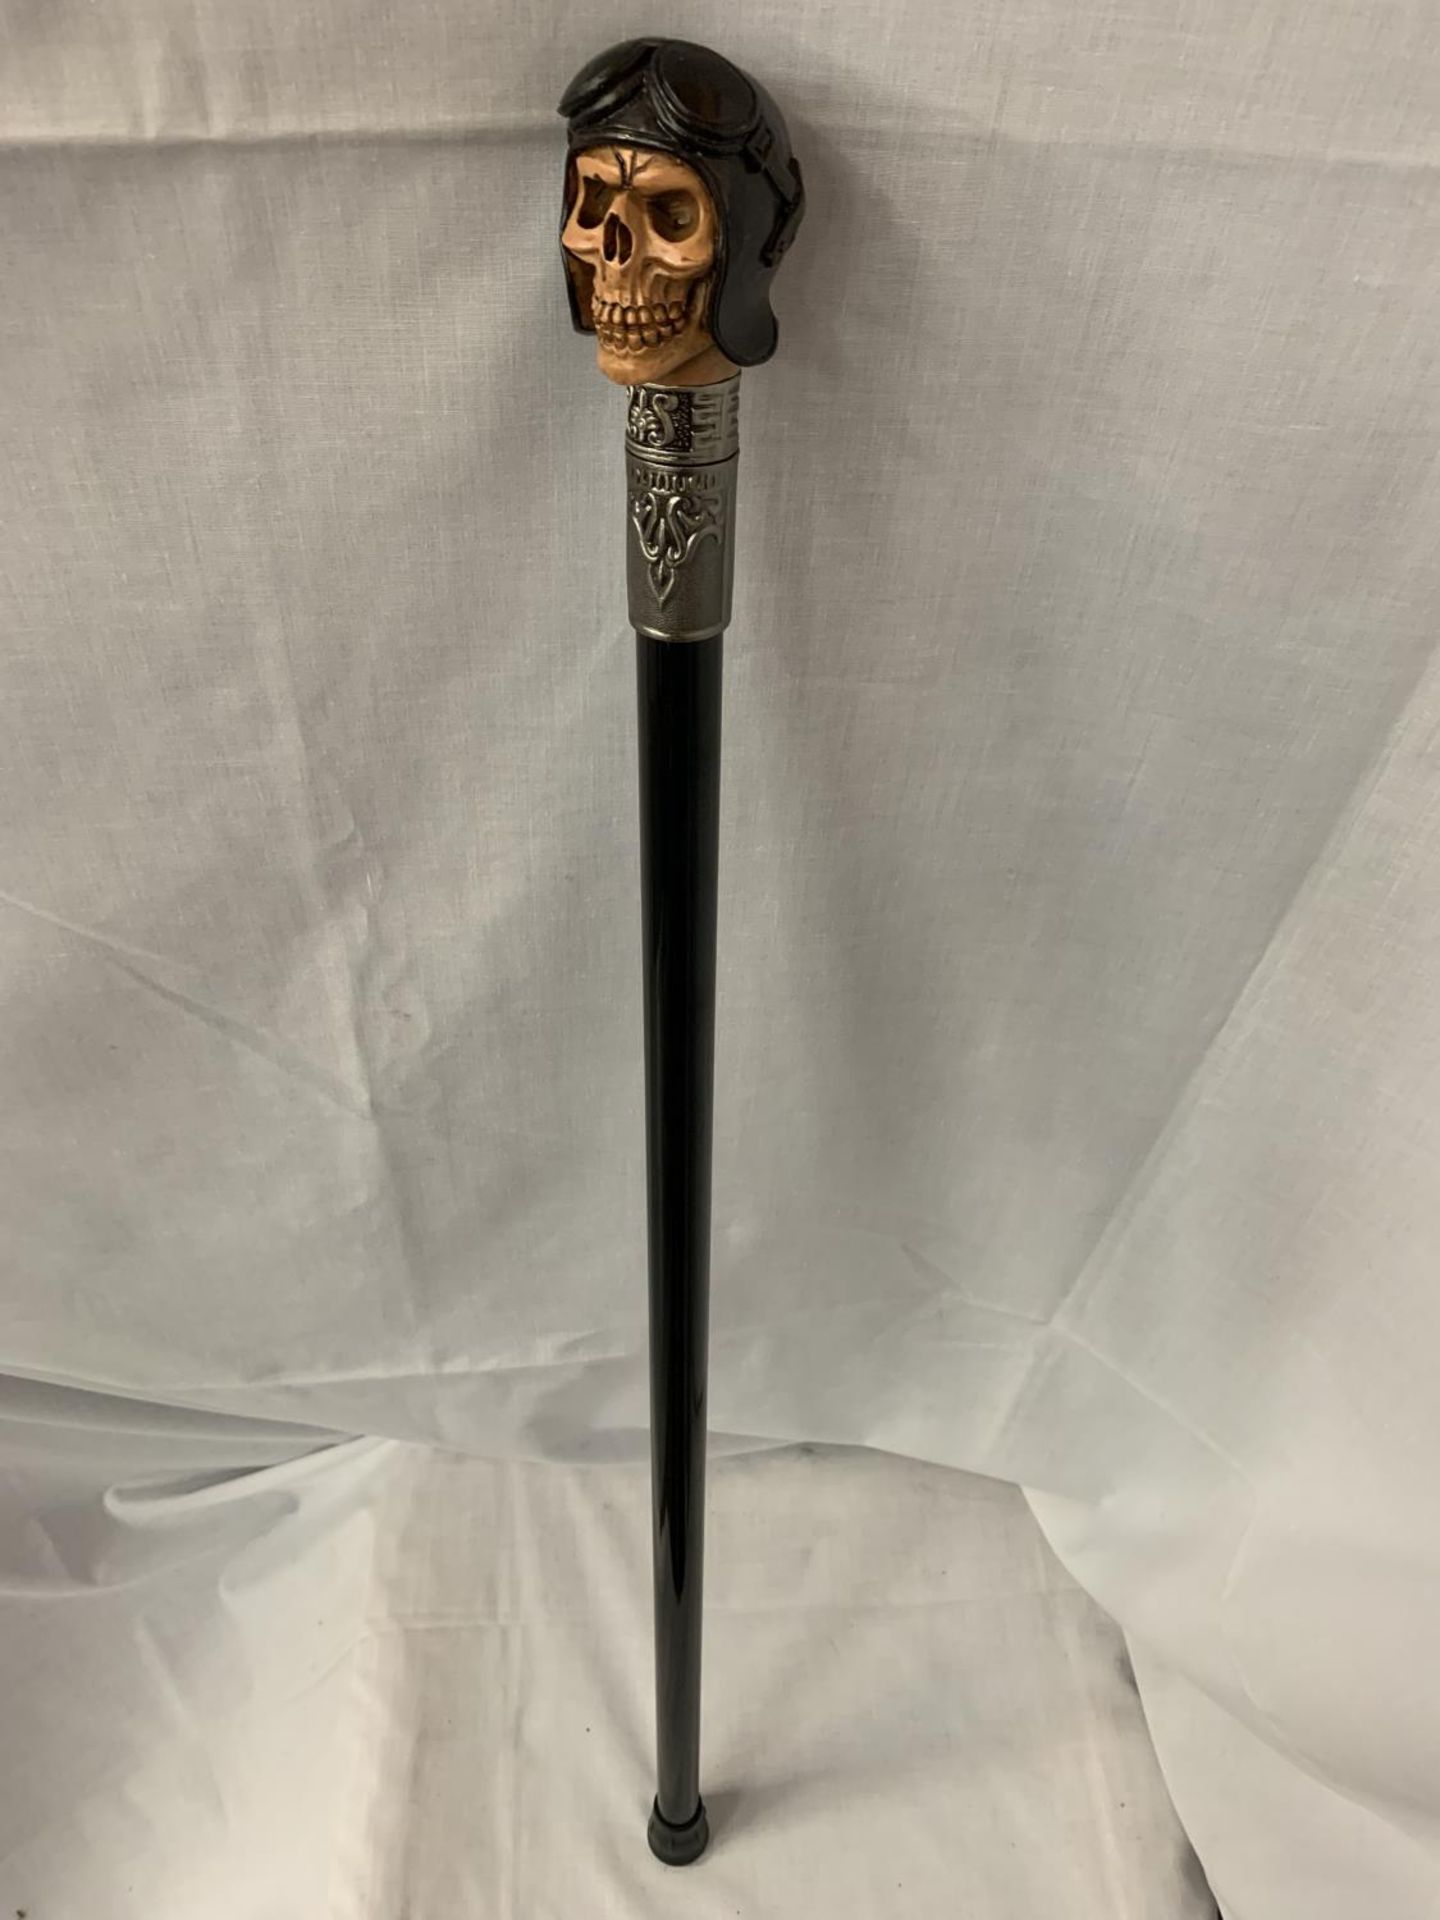 A WALKING STICK WITH A STEAMPUNK STYLE SKULL HEAD HANDLE